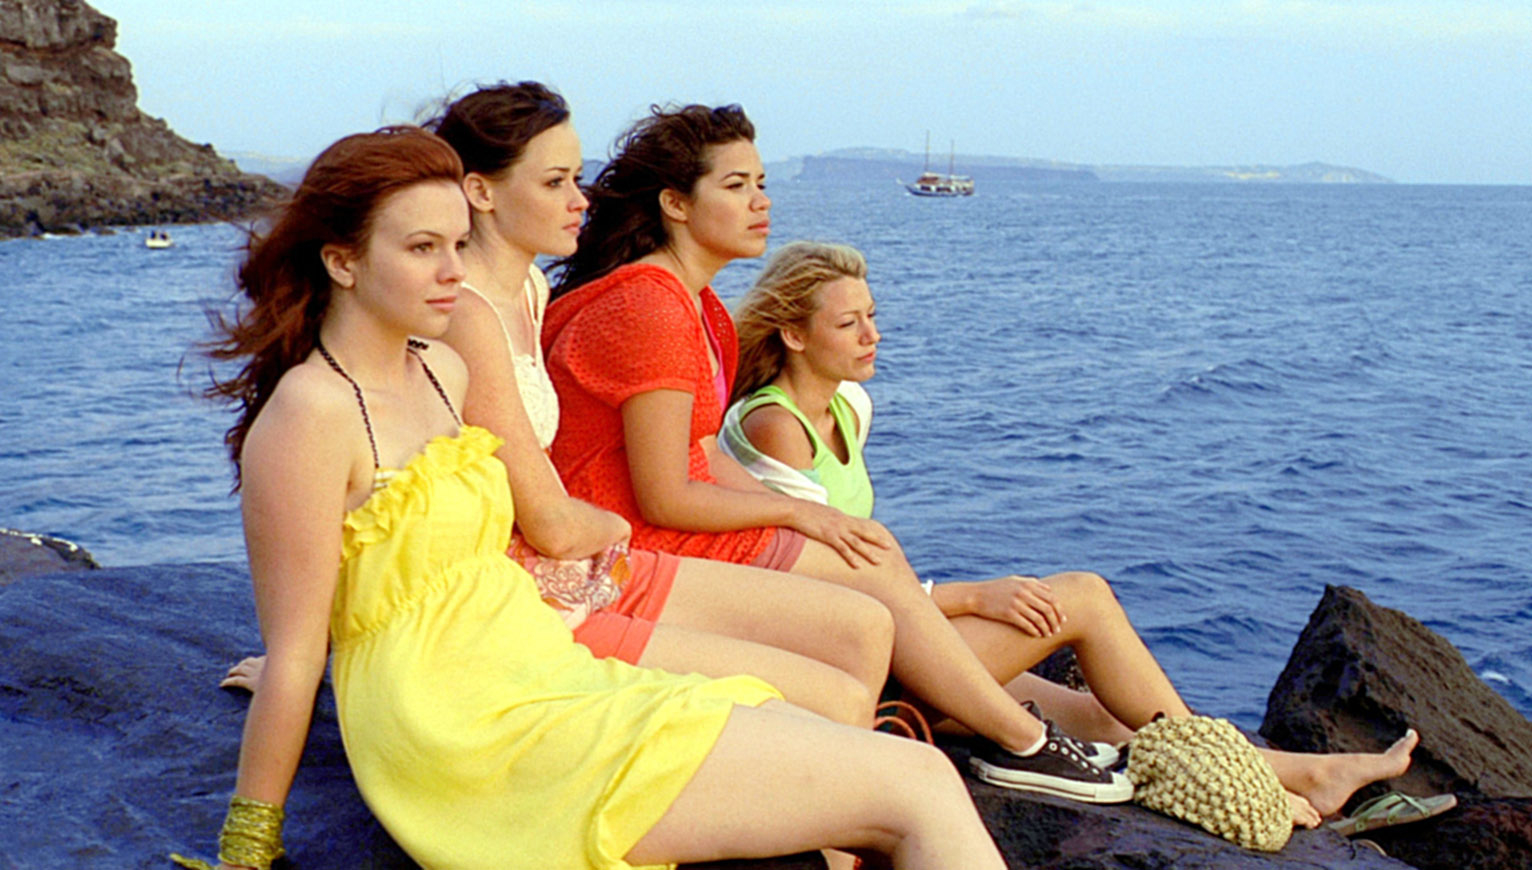 The friends sitting on rocks by the sea in a scene from &quot;The Sisterhood of the Traveling Pants&quot;